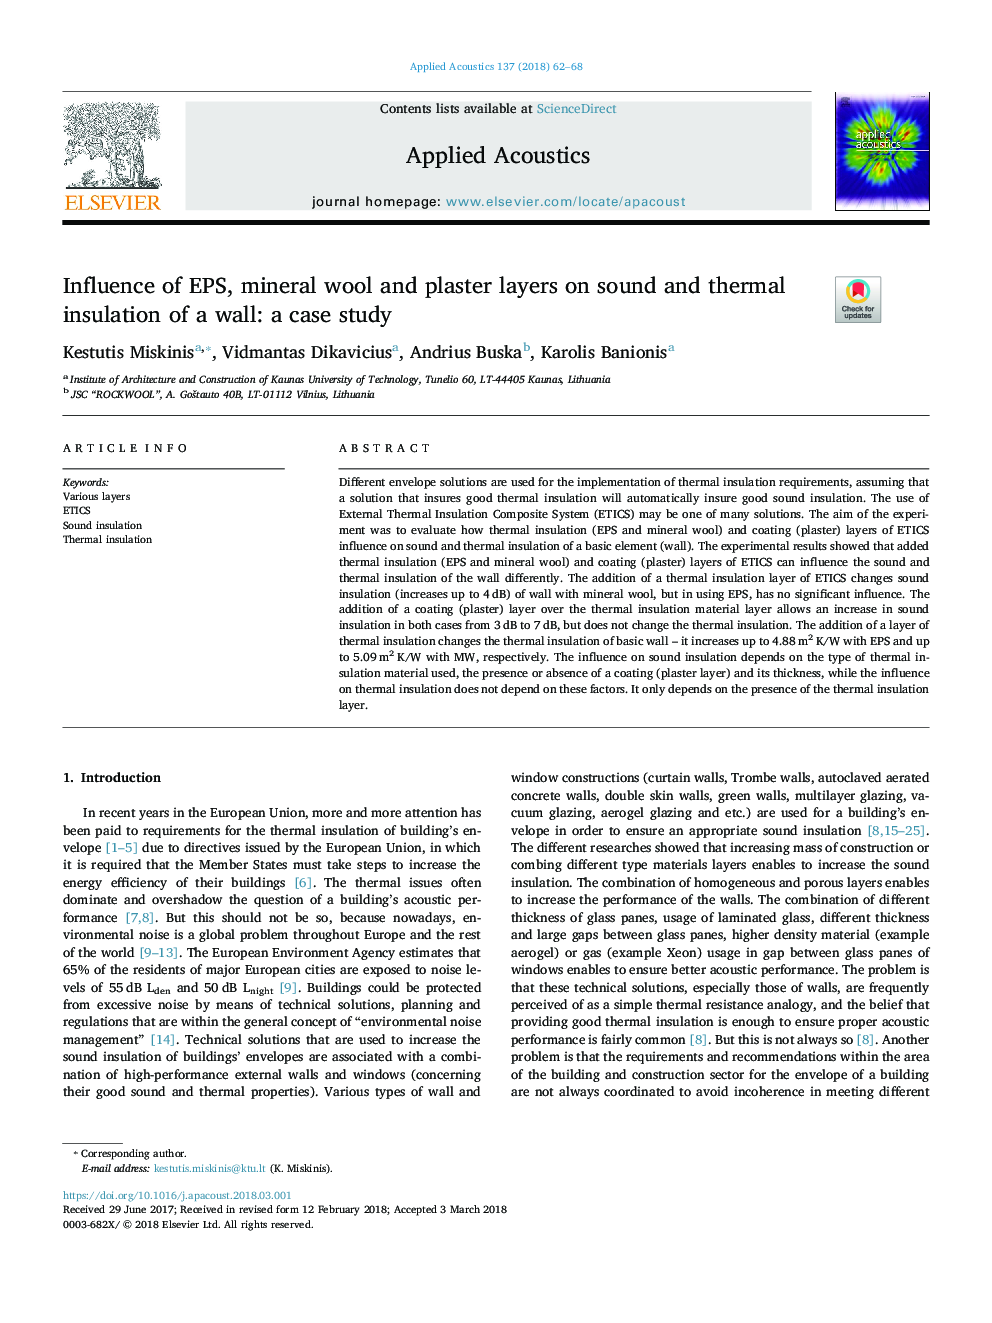 Influence of EPS, mineral wool and plaster layers on sound and thermal insulation of a wall: a case study